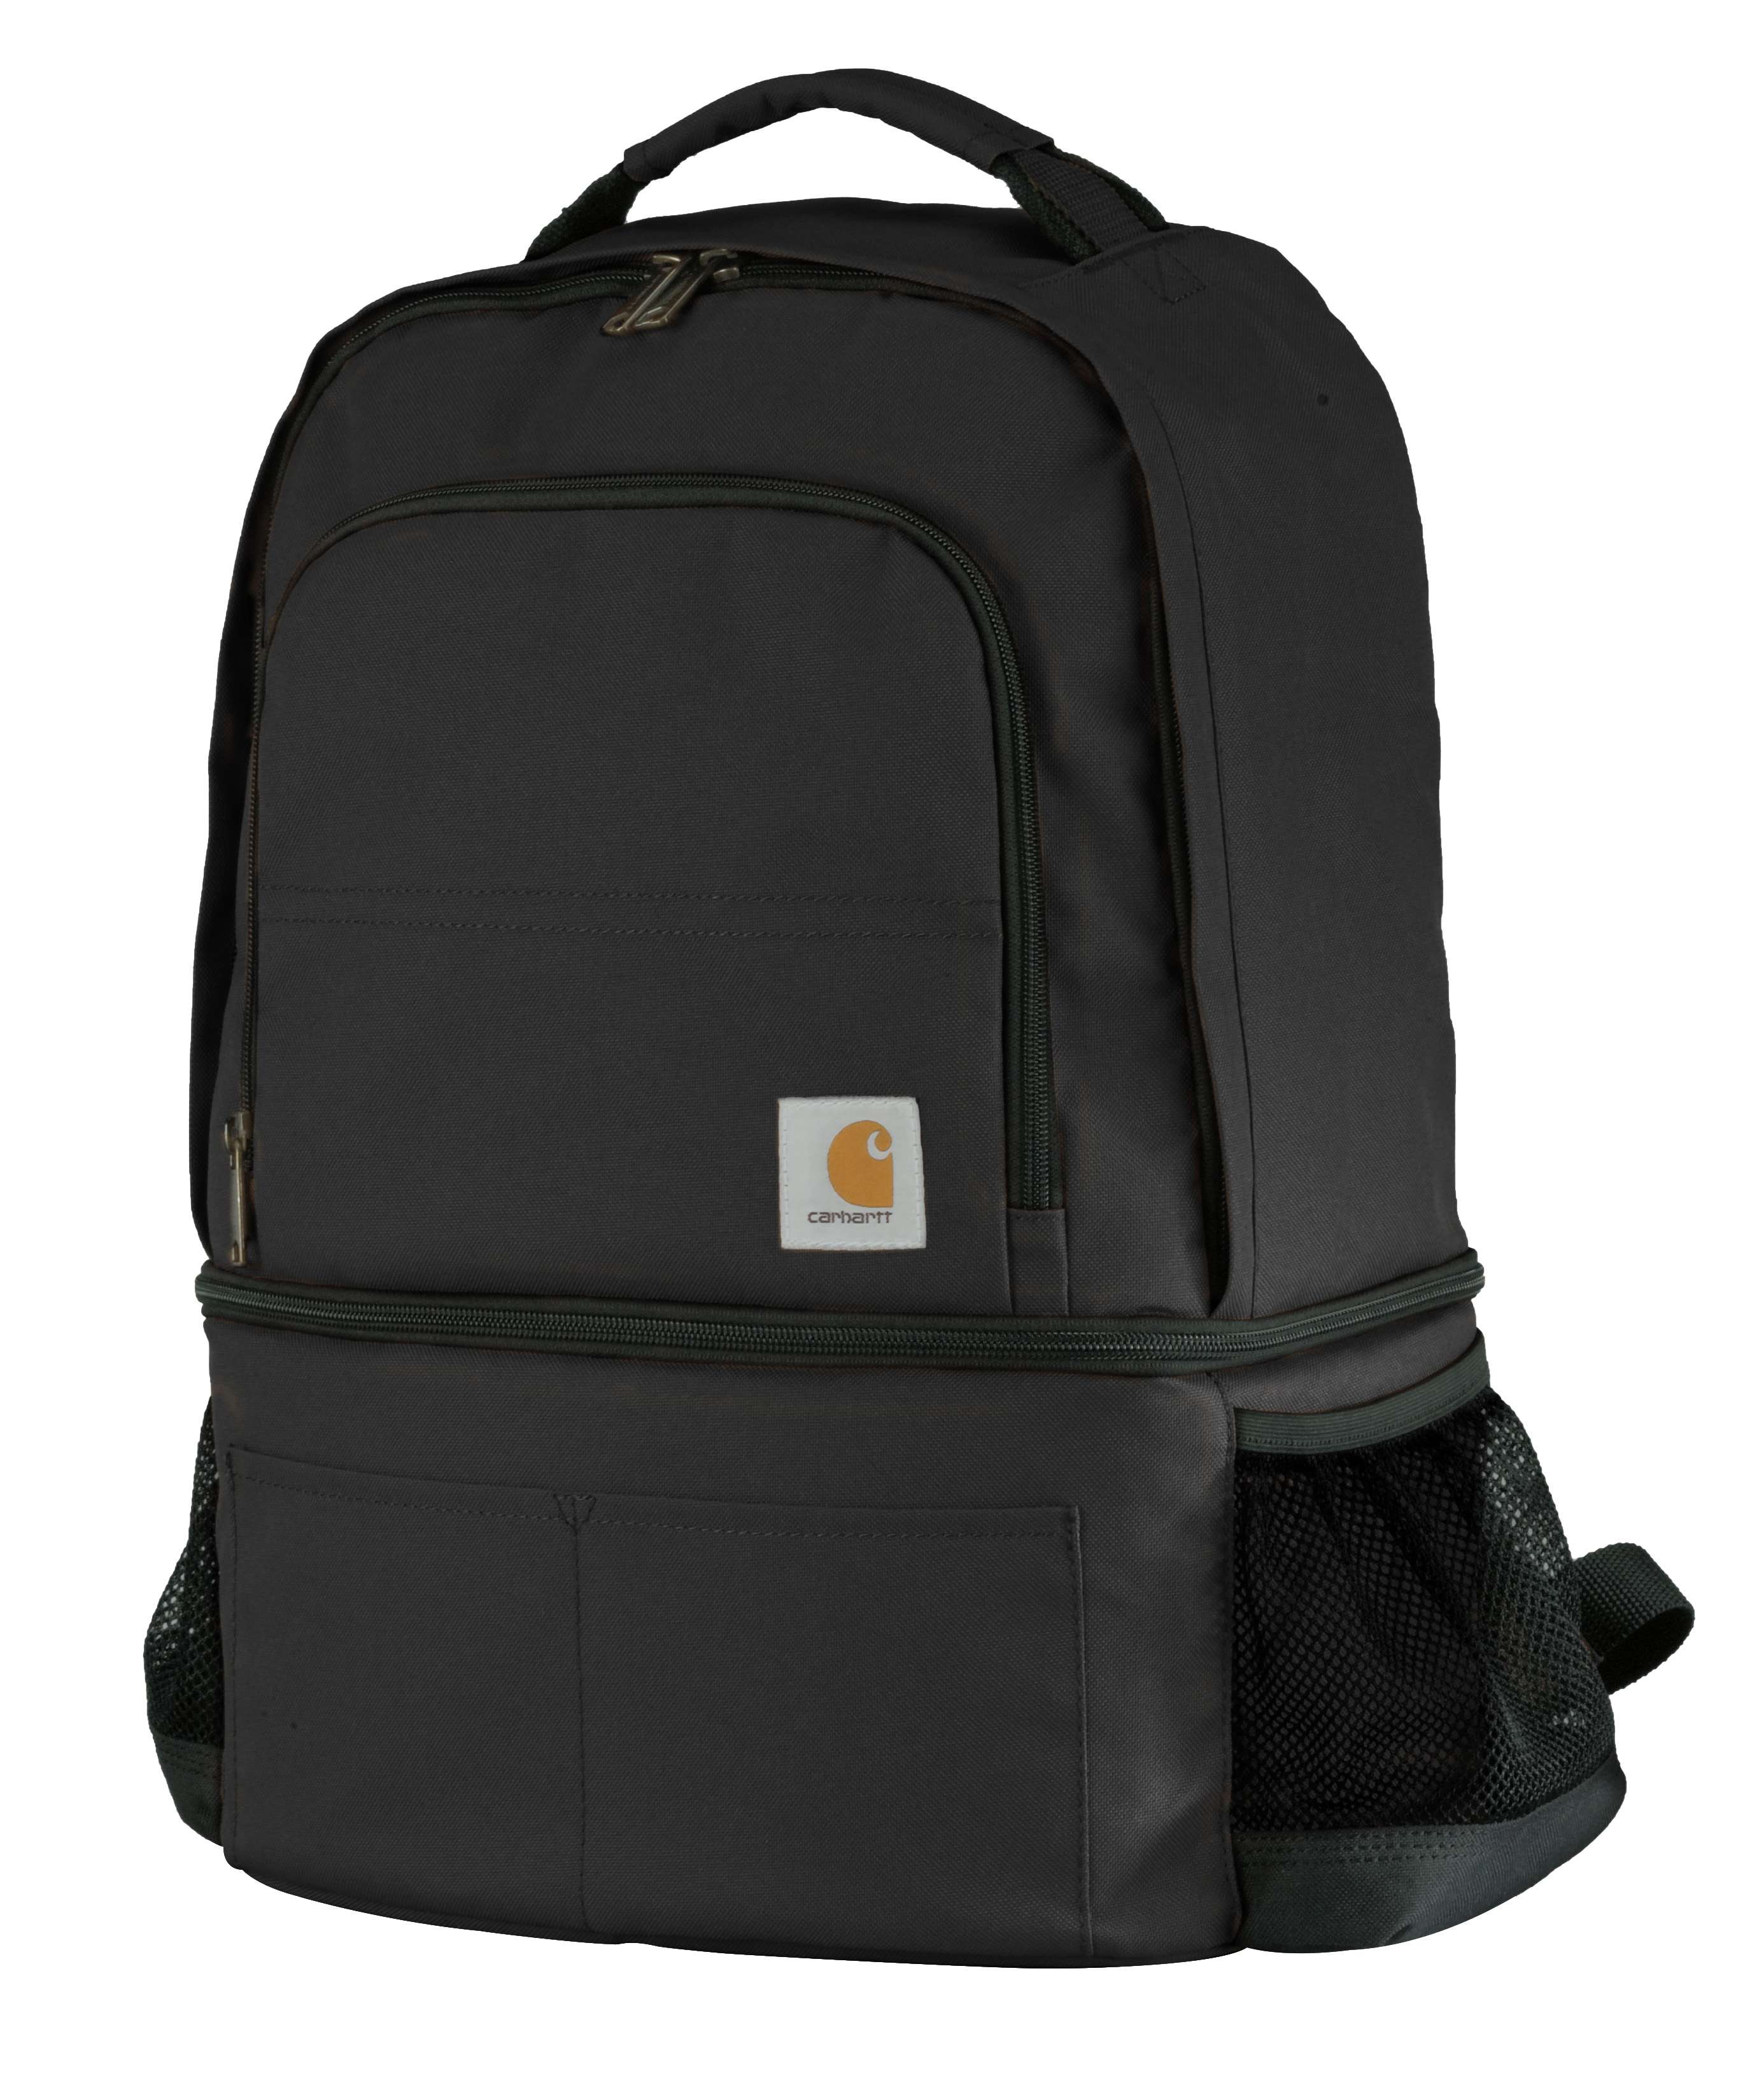 backpack with cooler on bottom